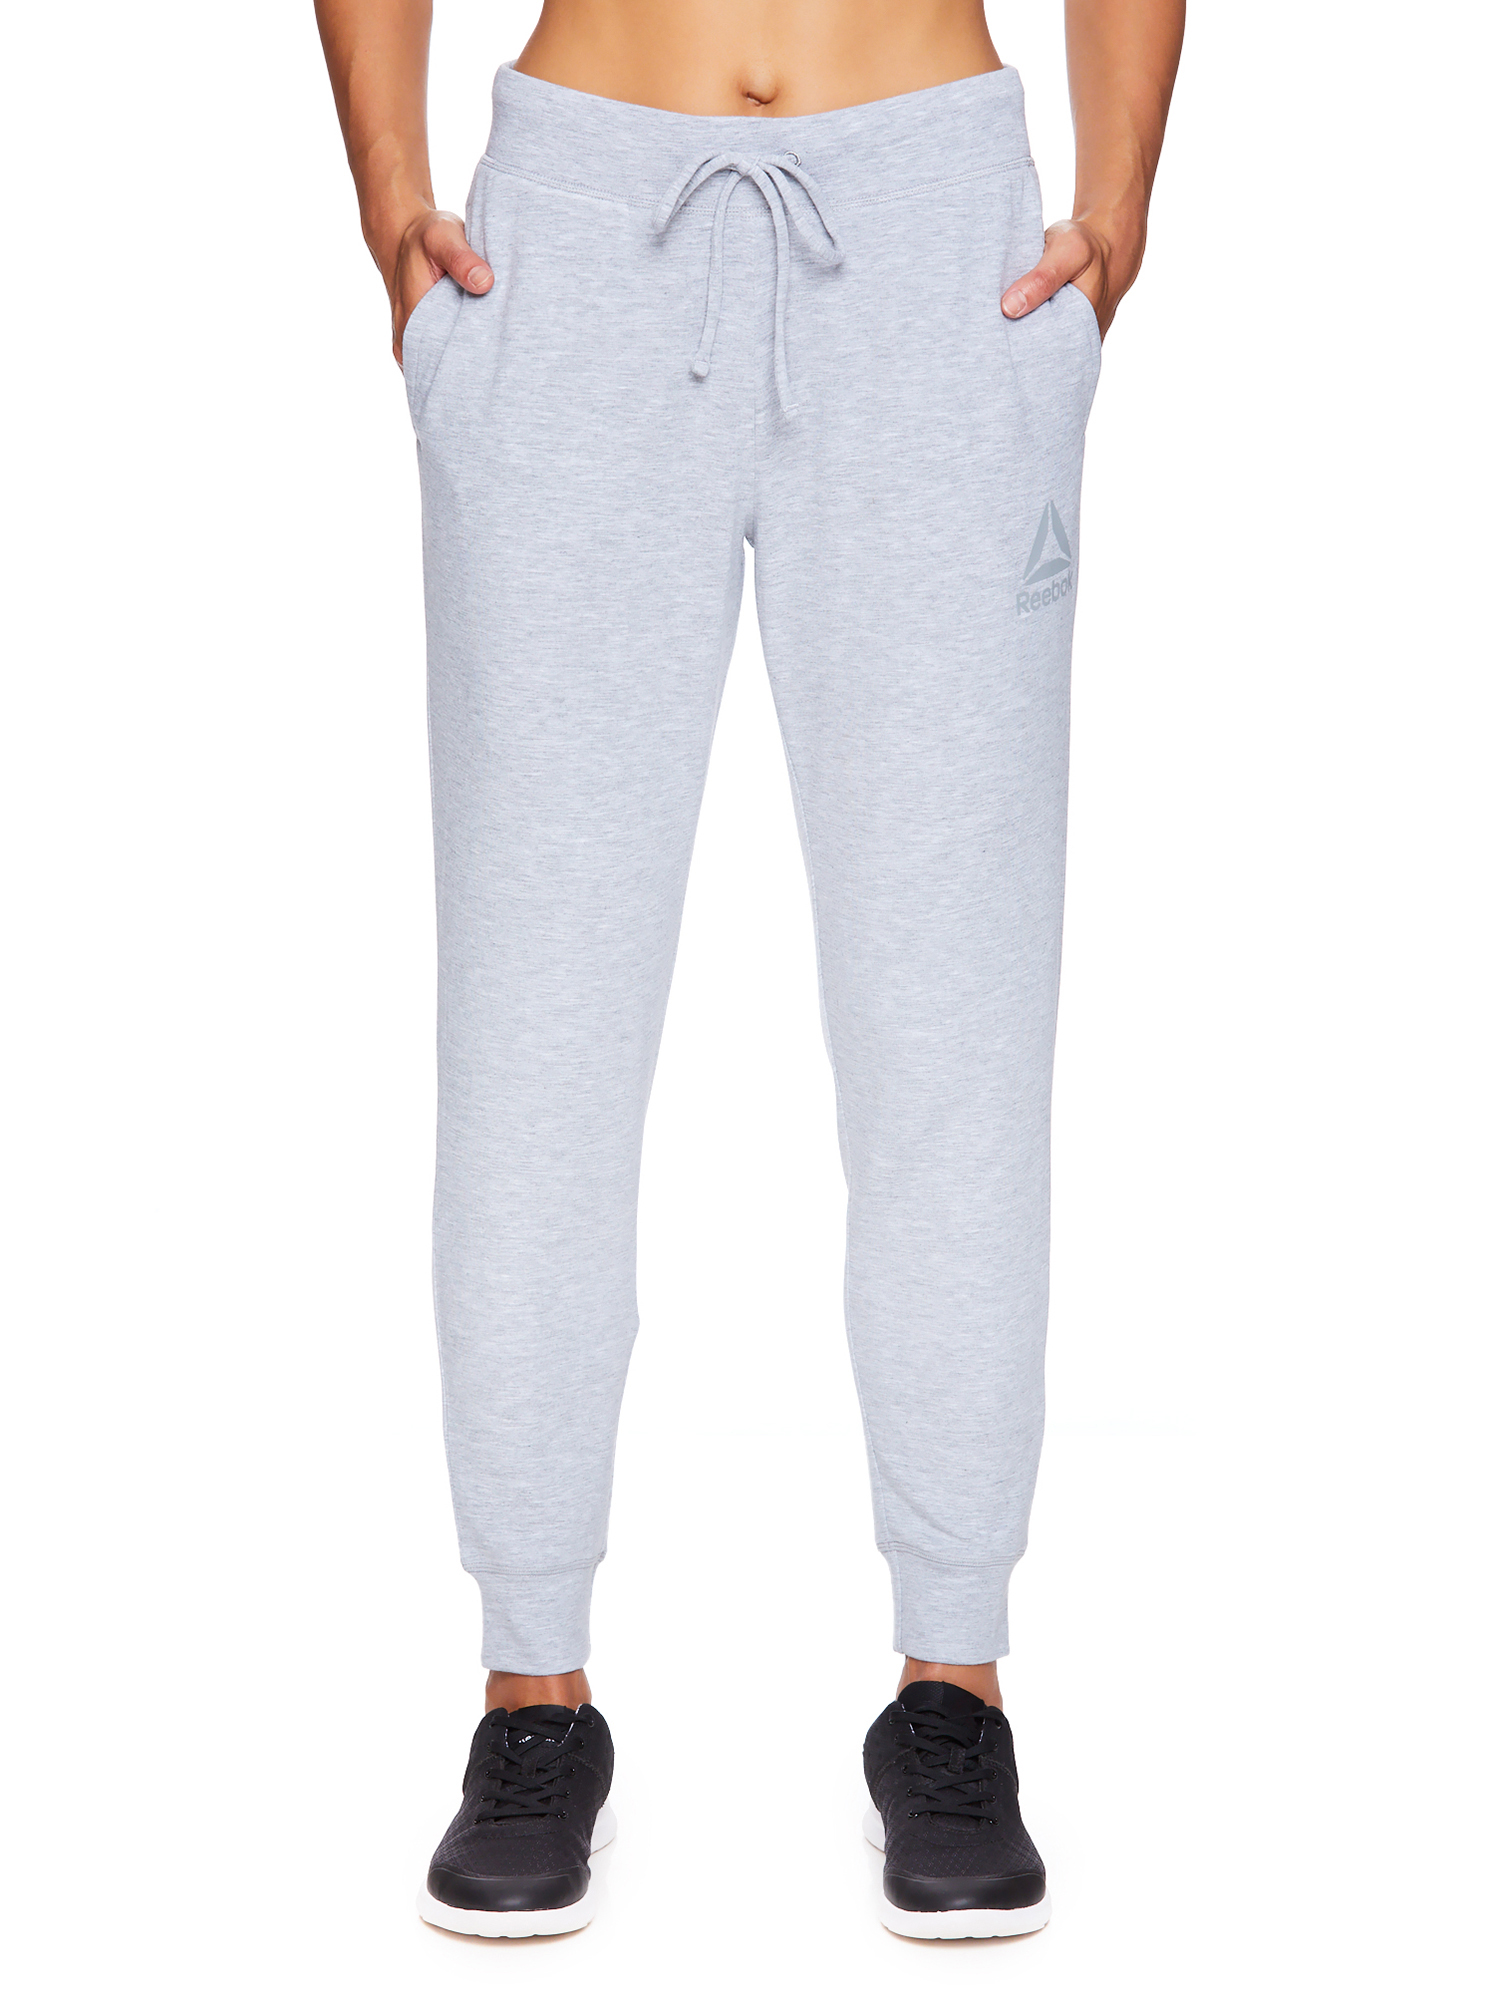 Reebok Womens Soft Jogger with Pockets - image 1 of 4